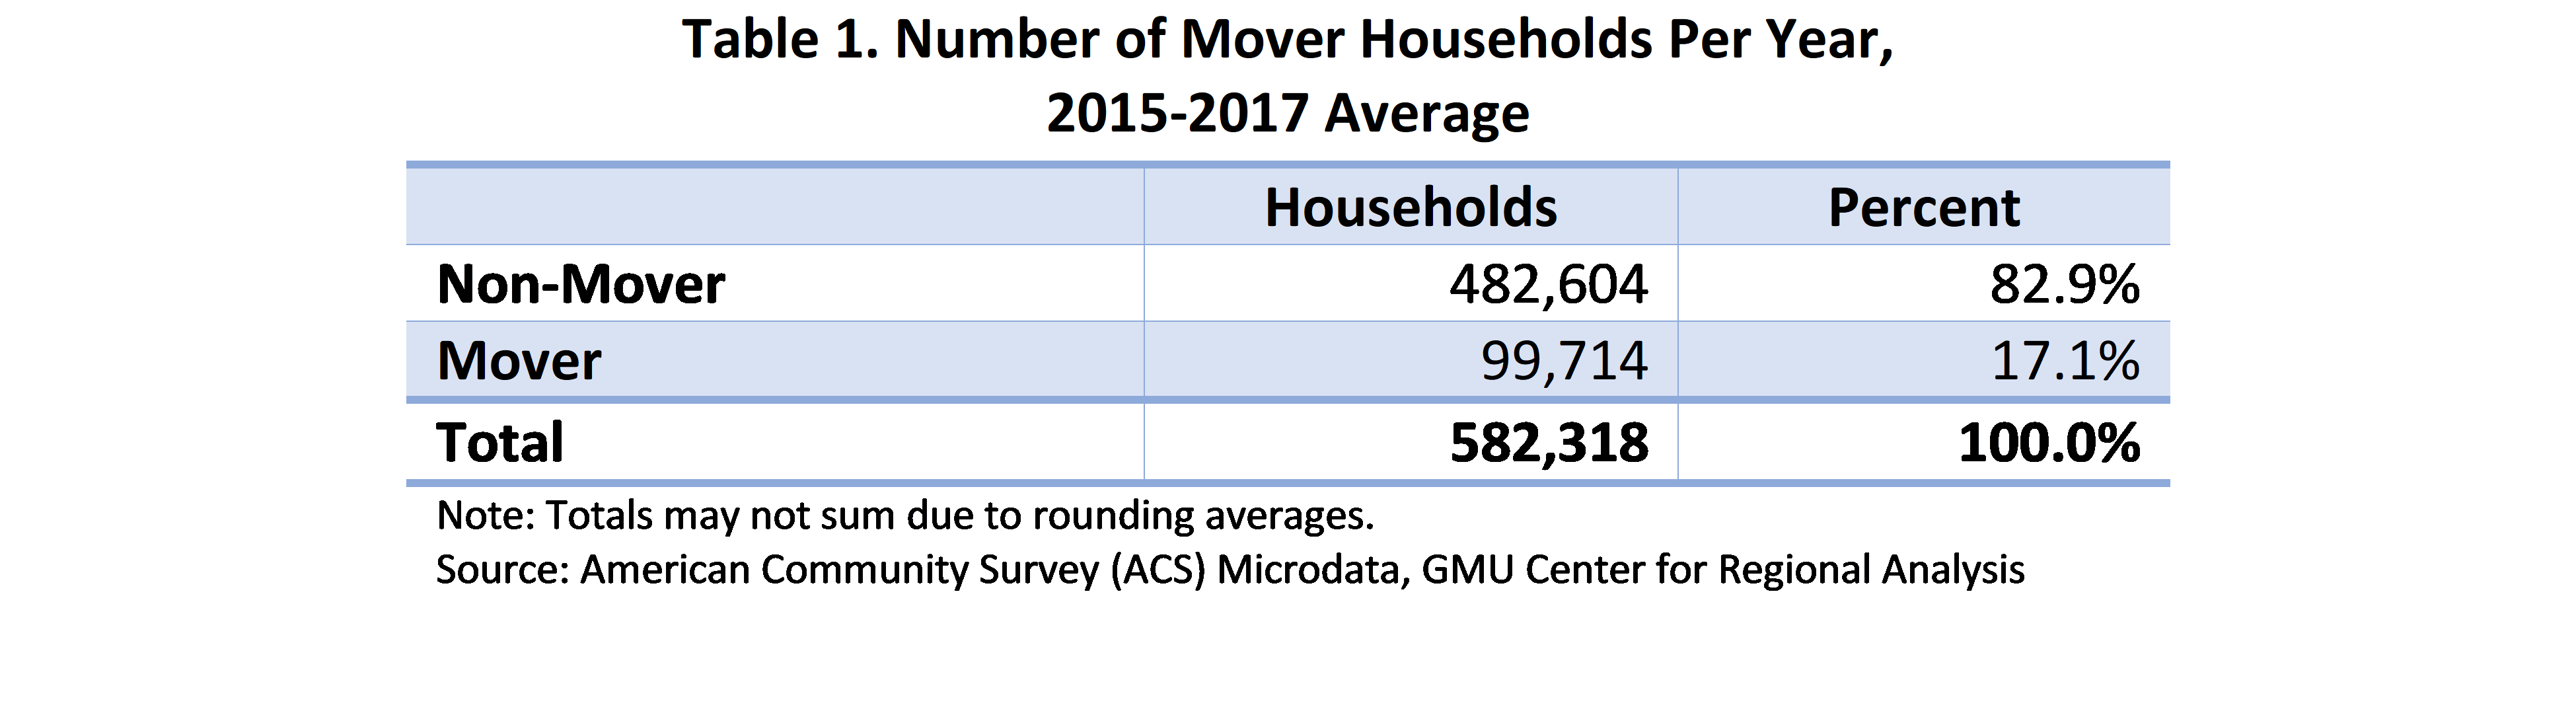 Table 1. Number of Mover Households Per Year